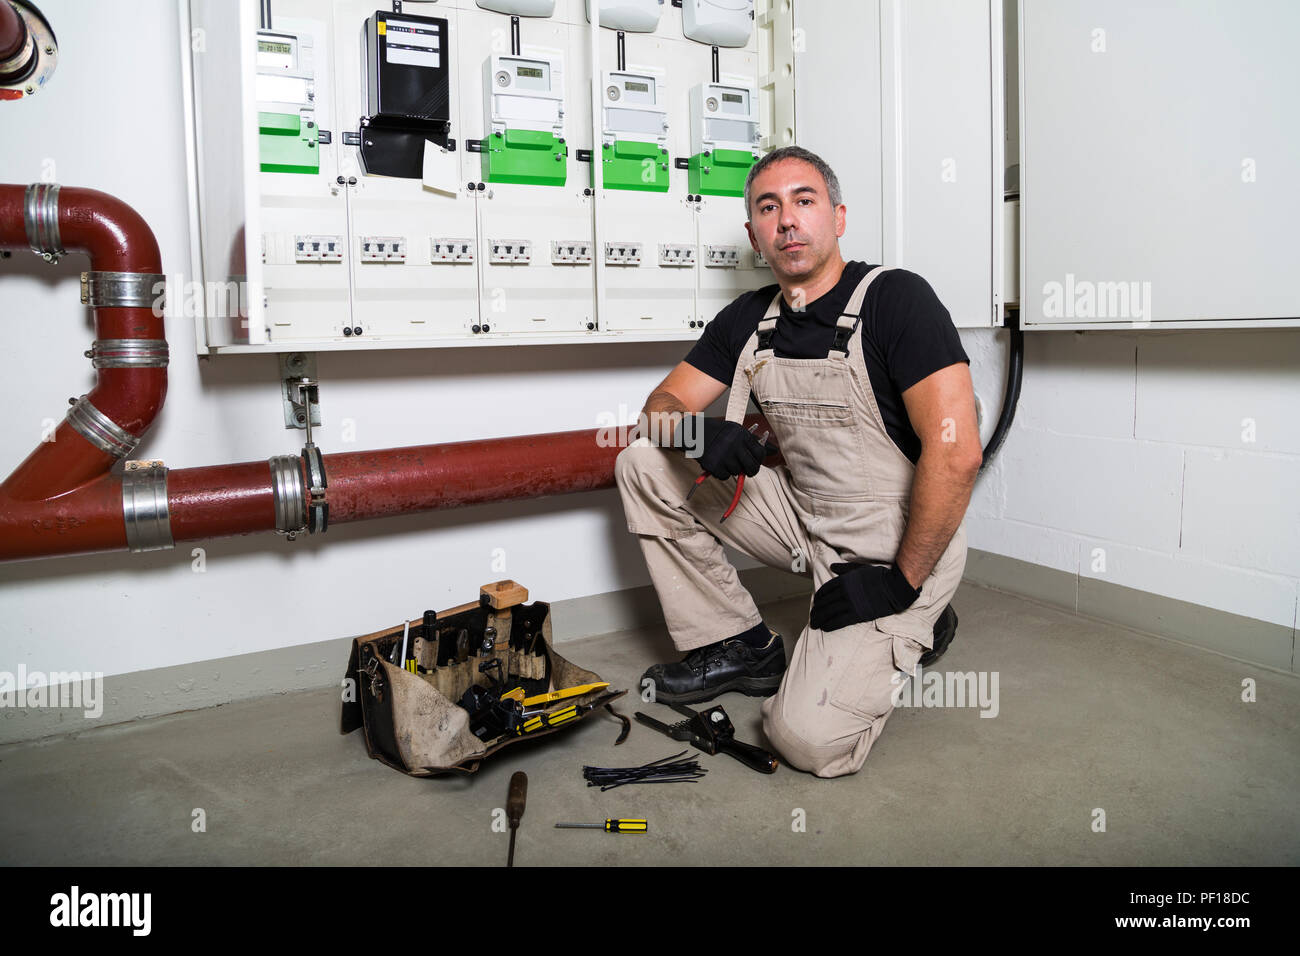 Electrician with box of tools seating near distribution or fuse board Stock Photo